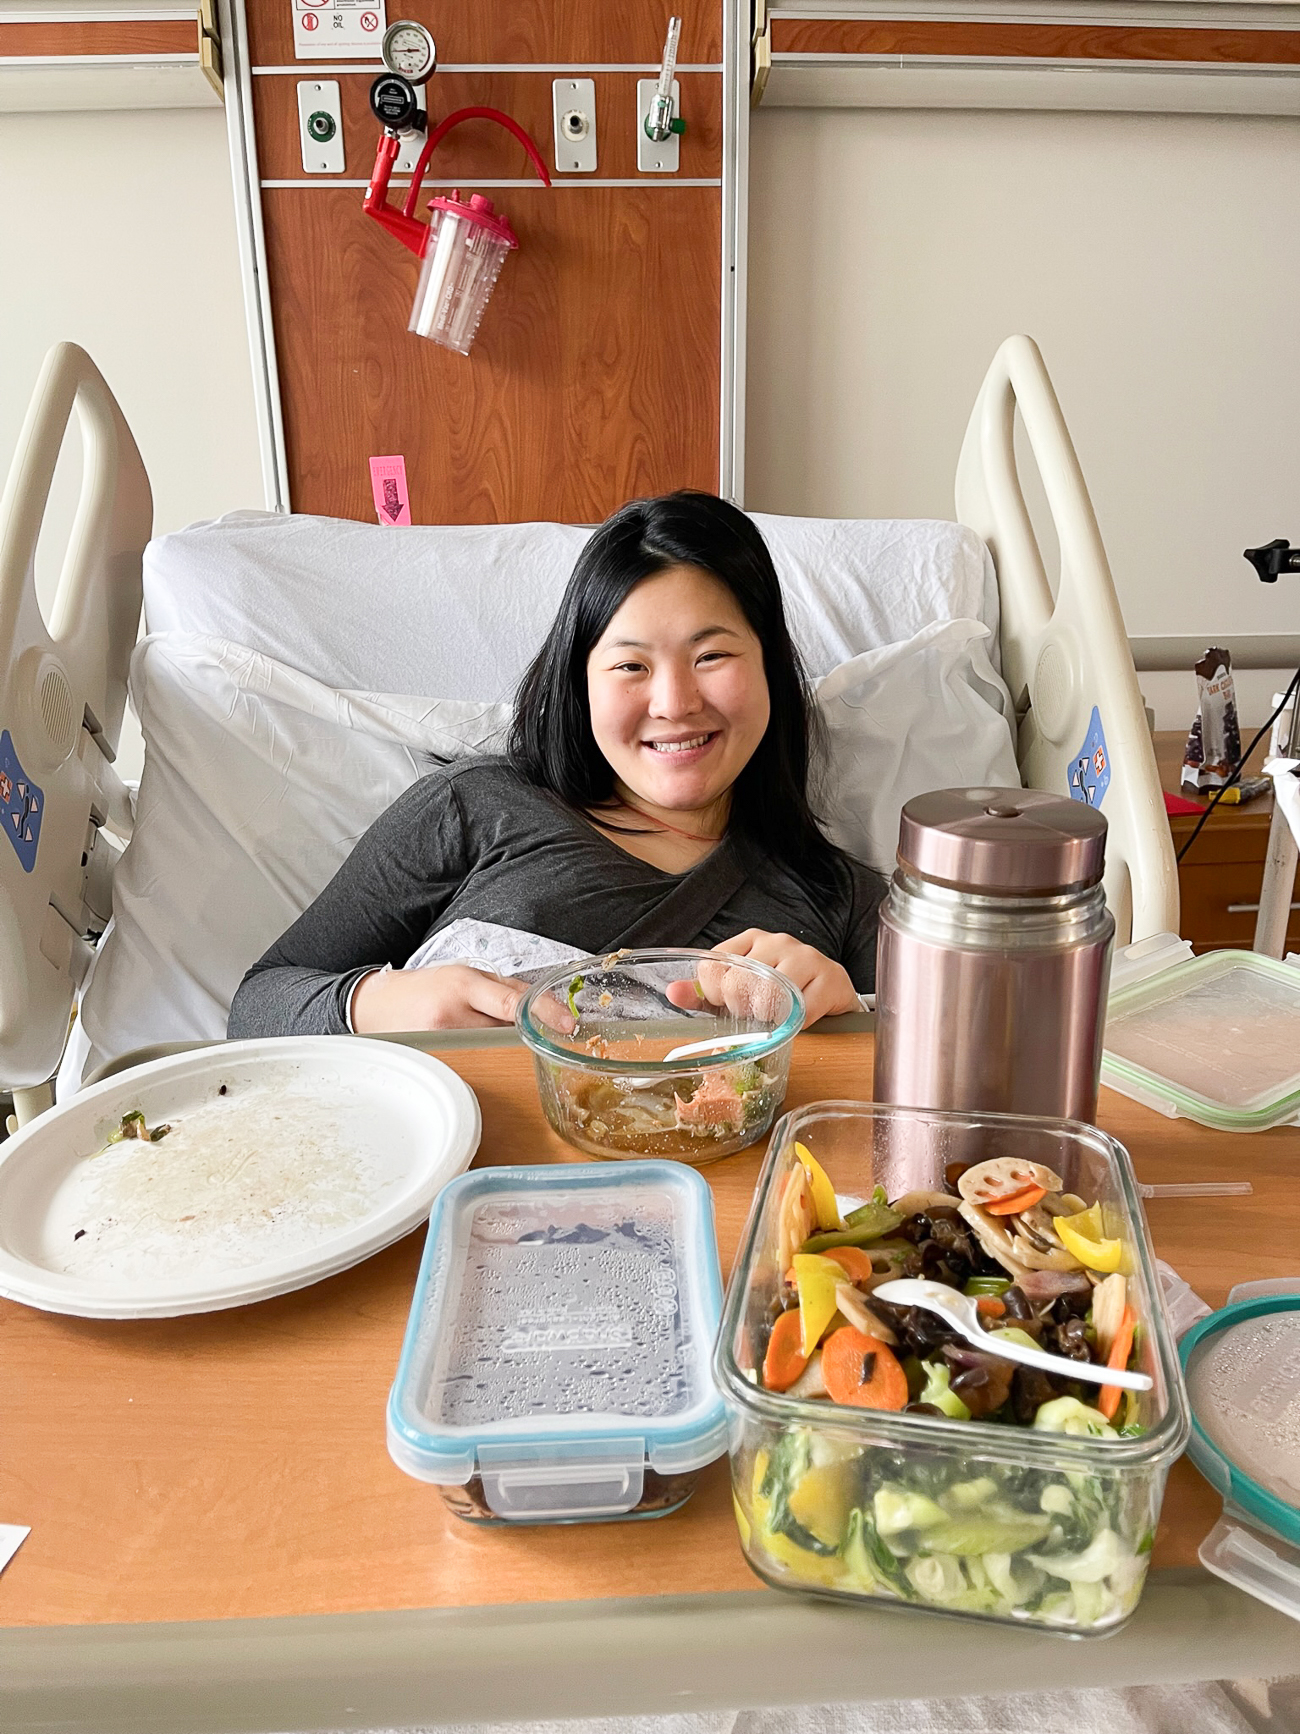 sarah in hospital with food